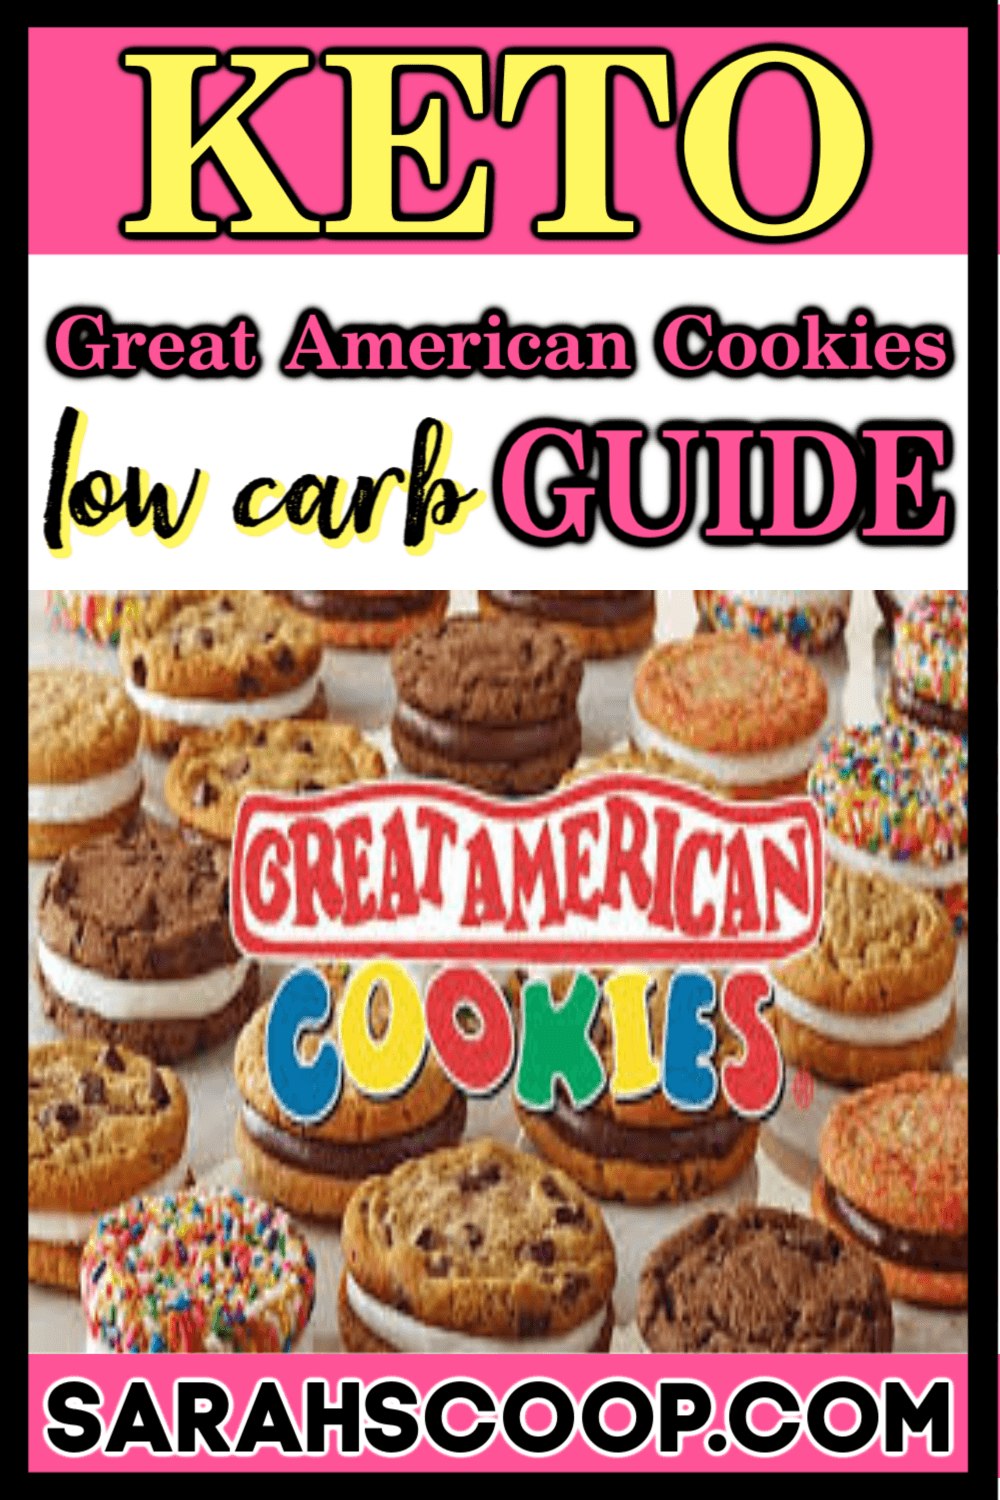 Great American Cookies low carb restaurant guide.